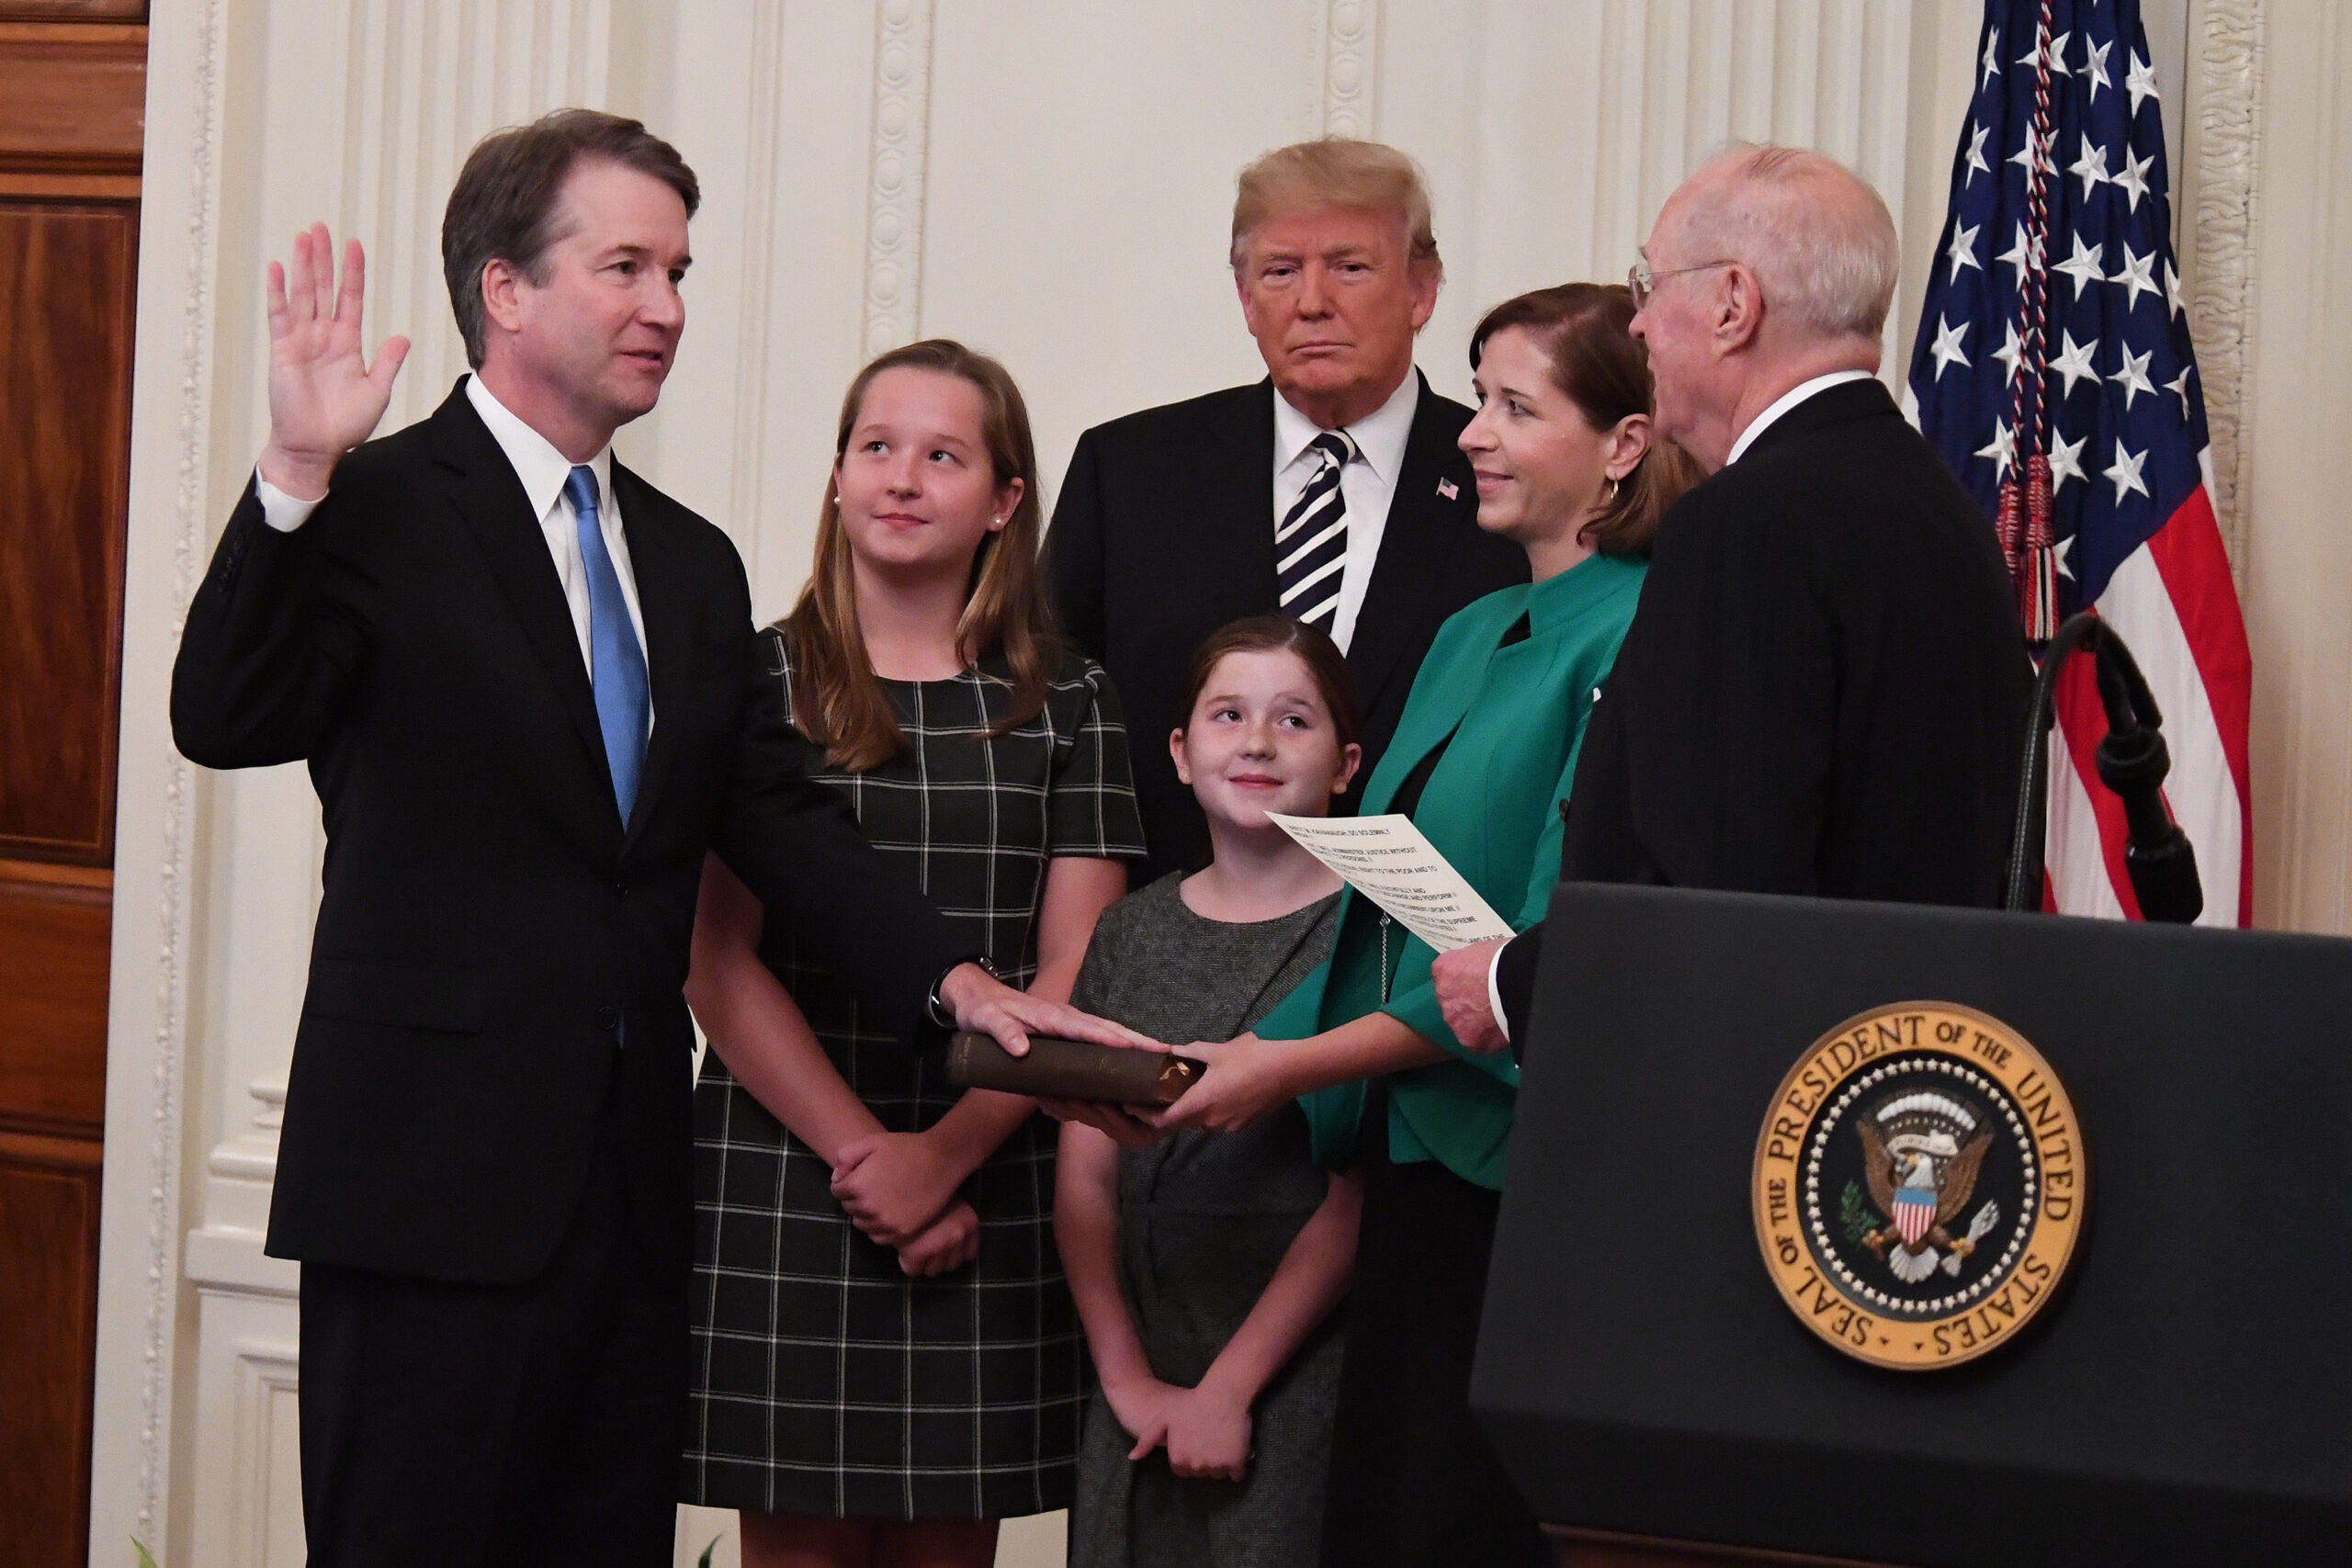 Brett Kavanaugh raise his right hand and put his left hand on a book as he swears an oath. His two daughters and wife, President Donald Trump and Justice A. Kennedy looks on.